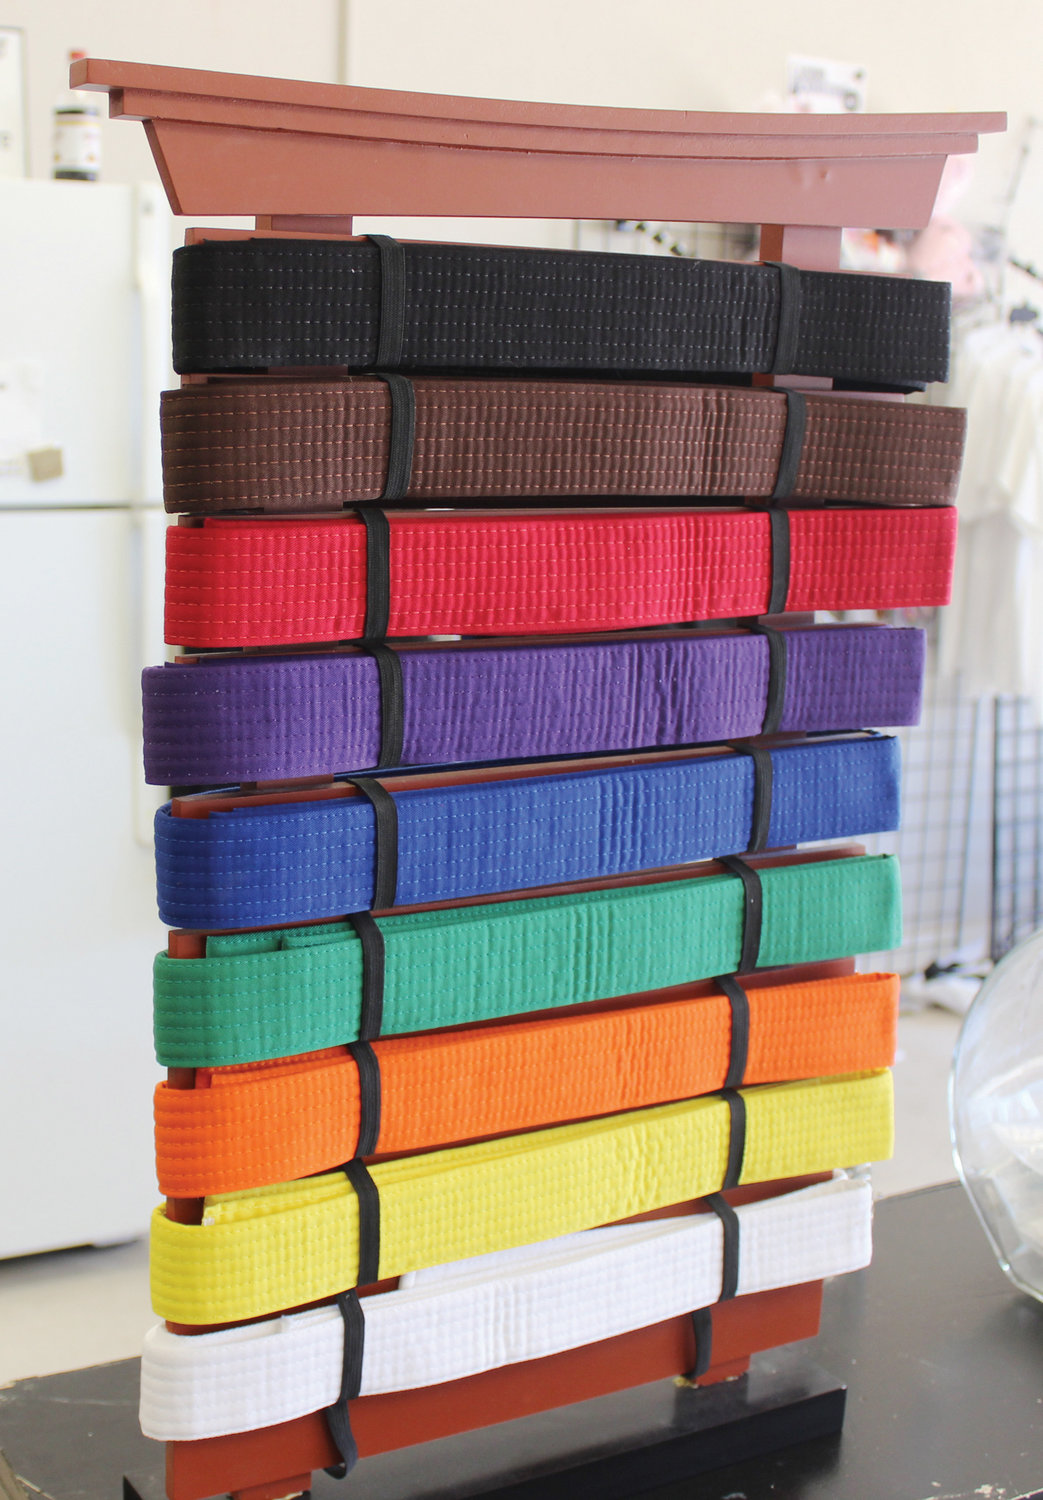 Nine colored belts are prominently displayed at Jimboy’s Fighting Arts Academy, motivating martial arts students.